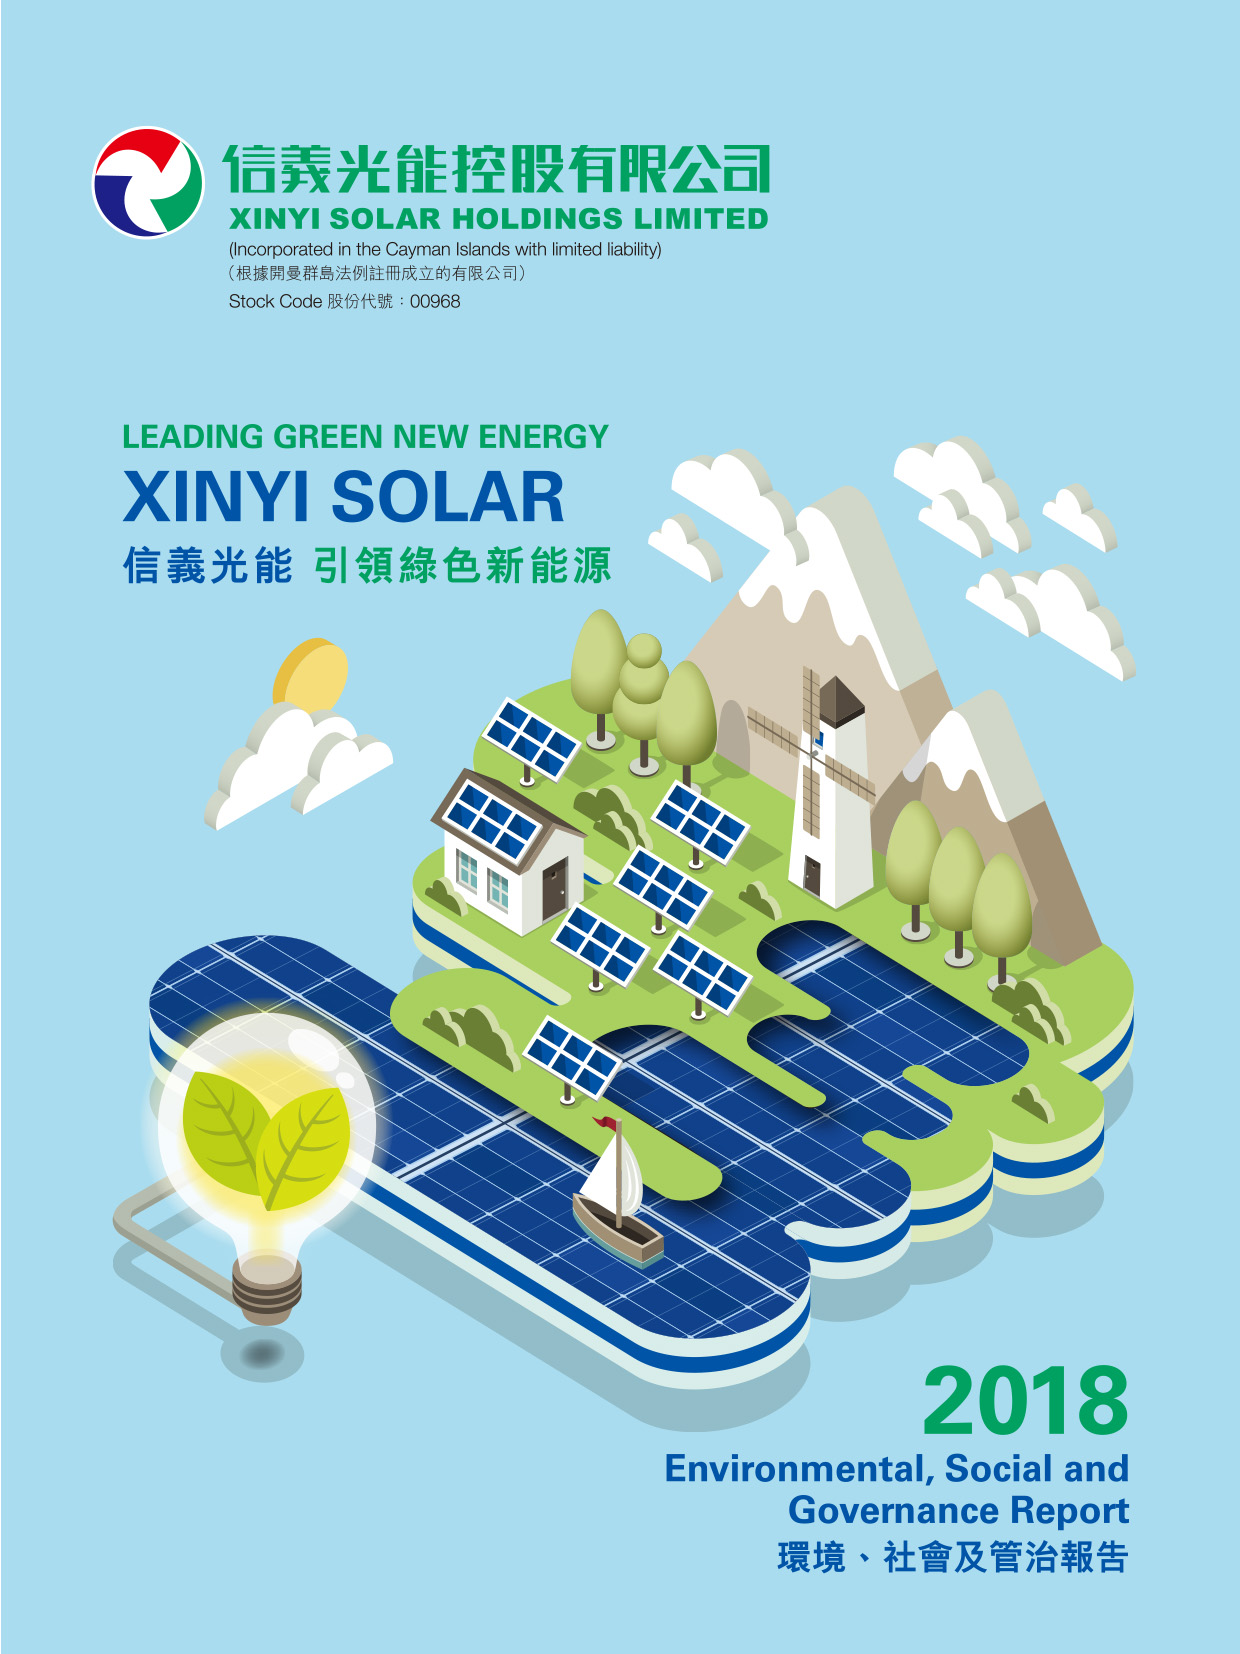 XINYI SOLAR HOLDINGS LIMITED ESG